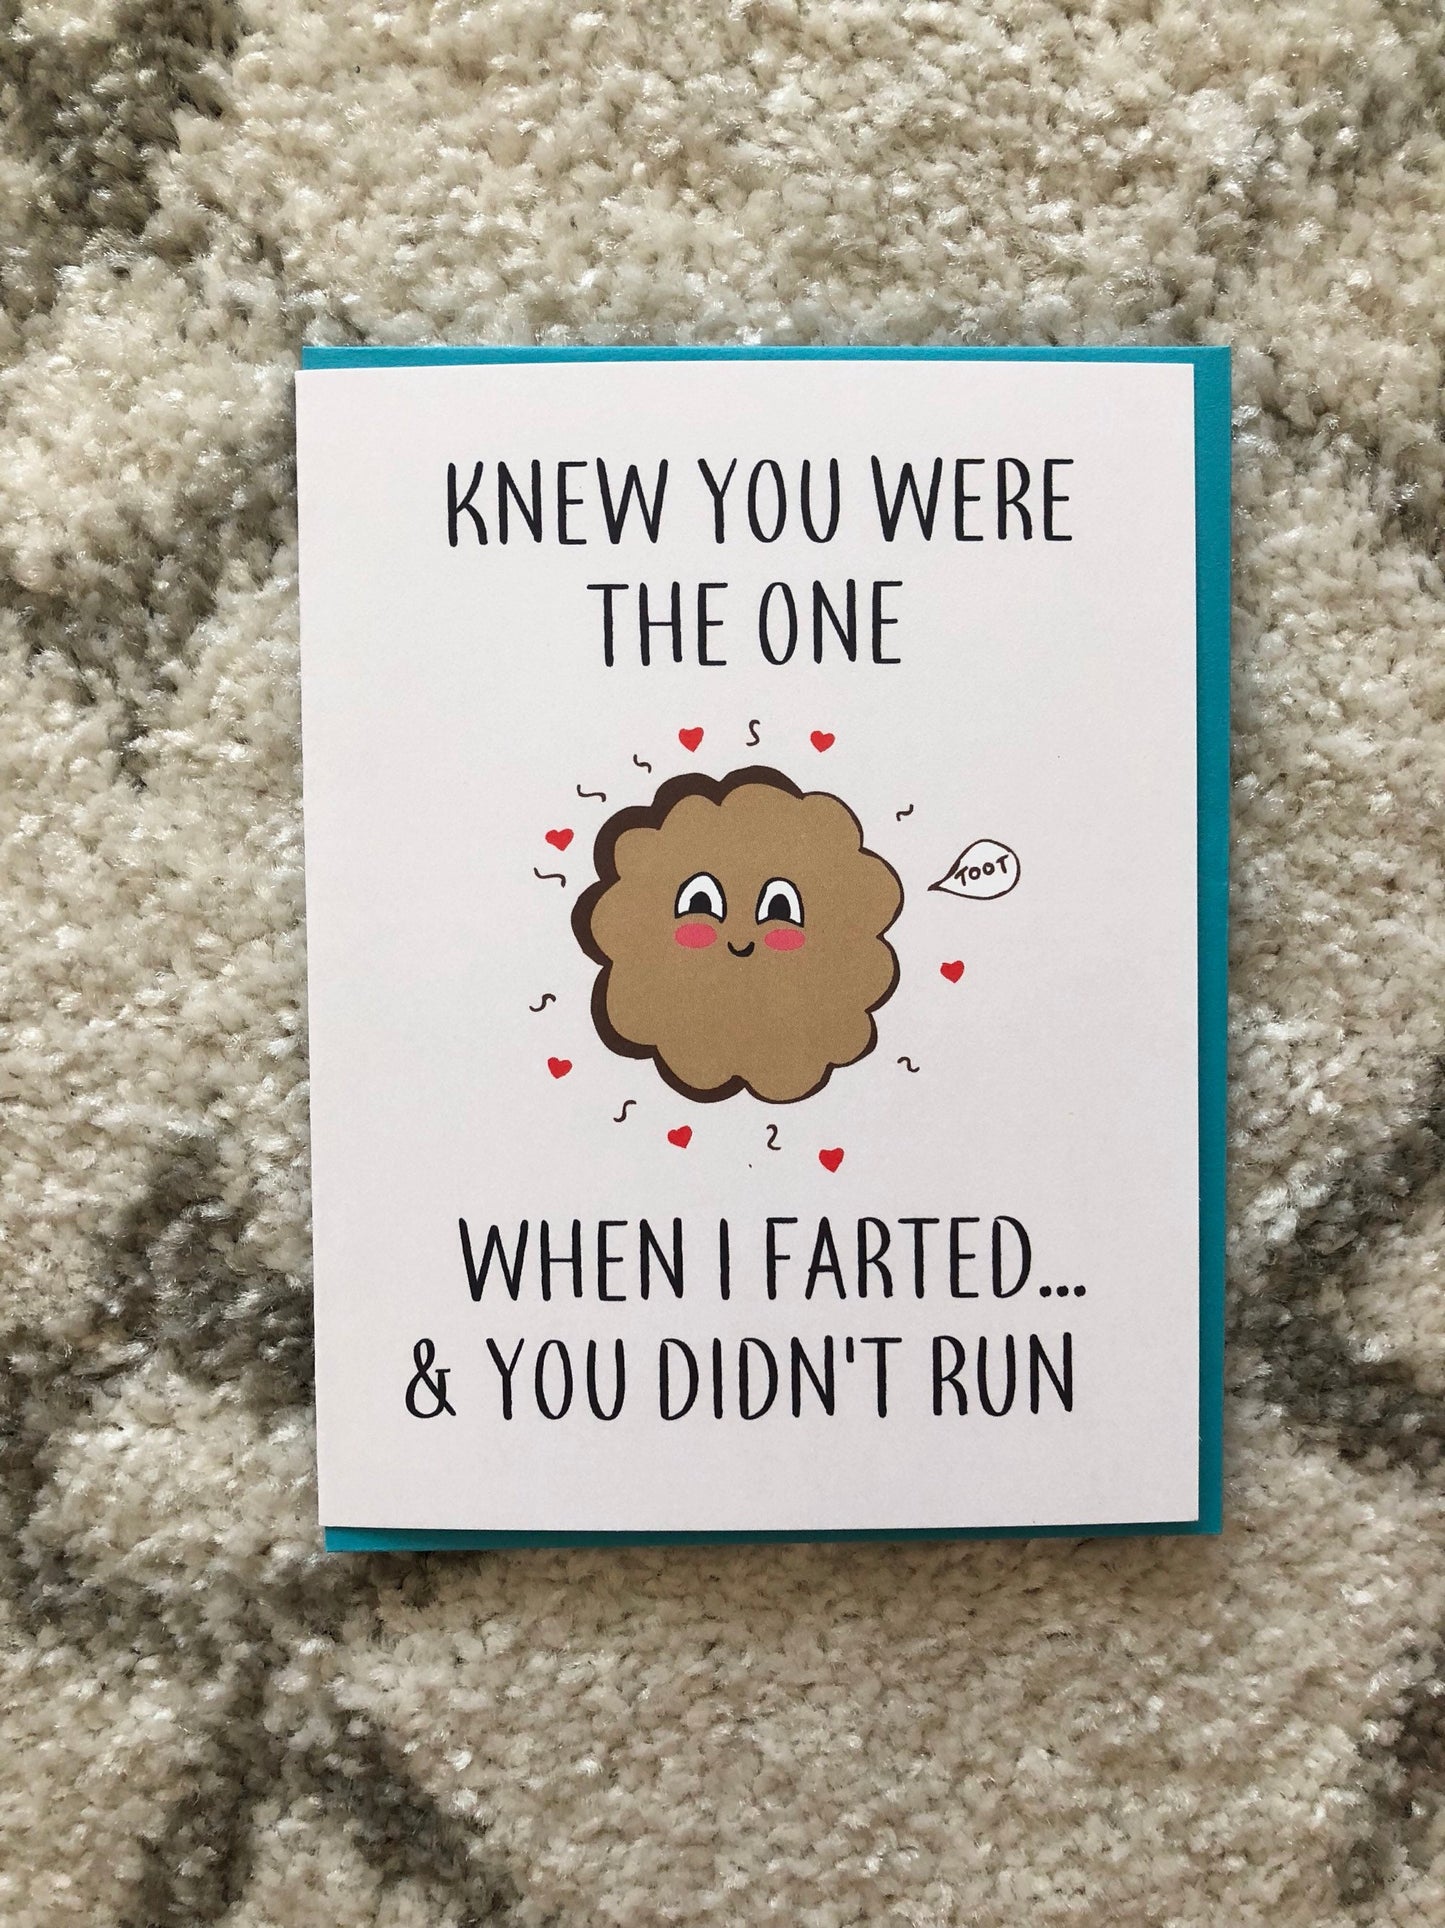 Knew You Were the One Fart Card - Toot Love Card, Funny Anniversary Card